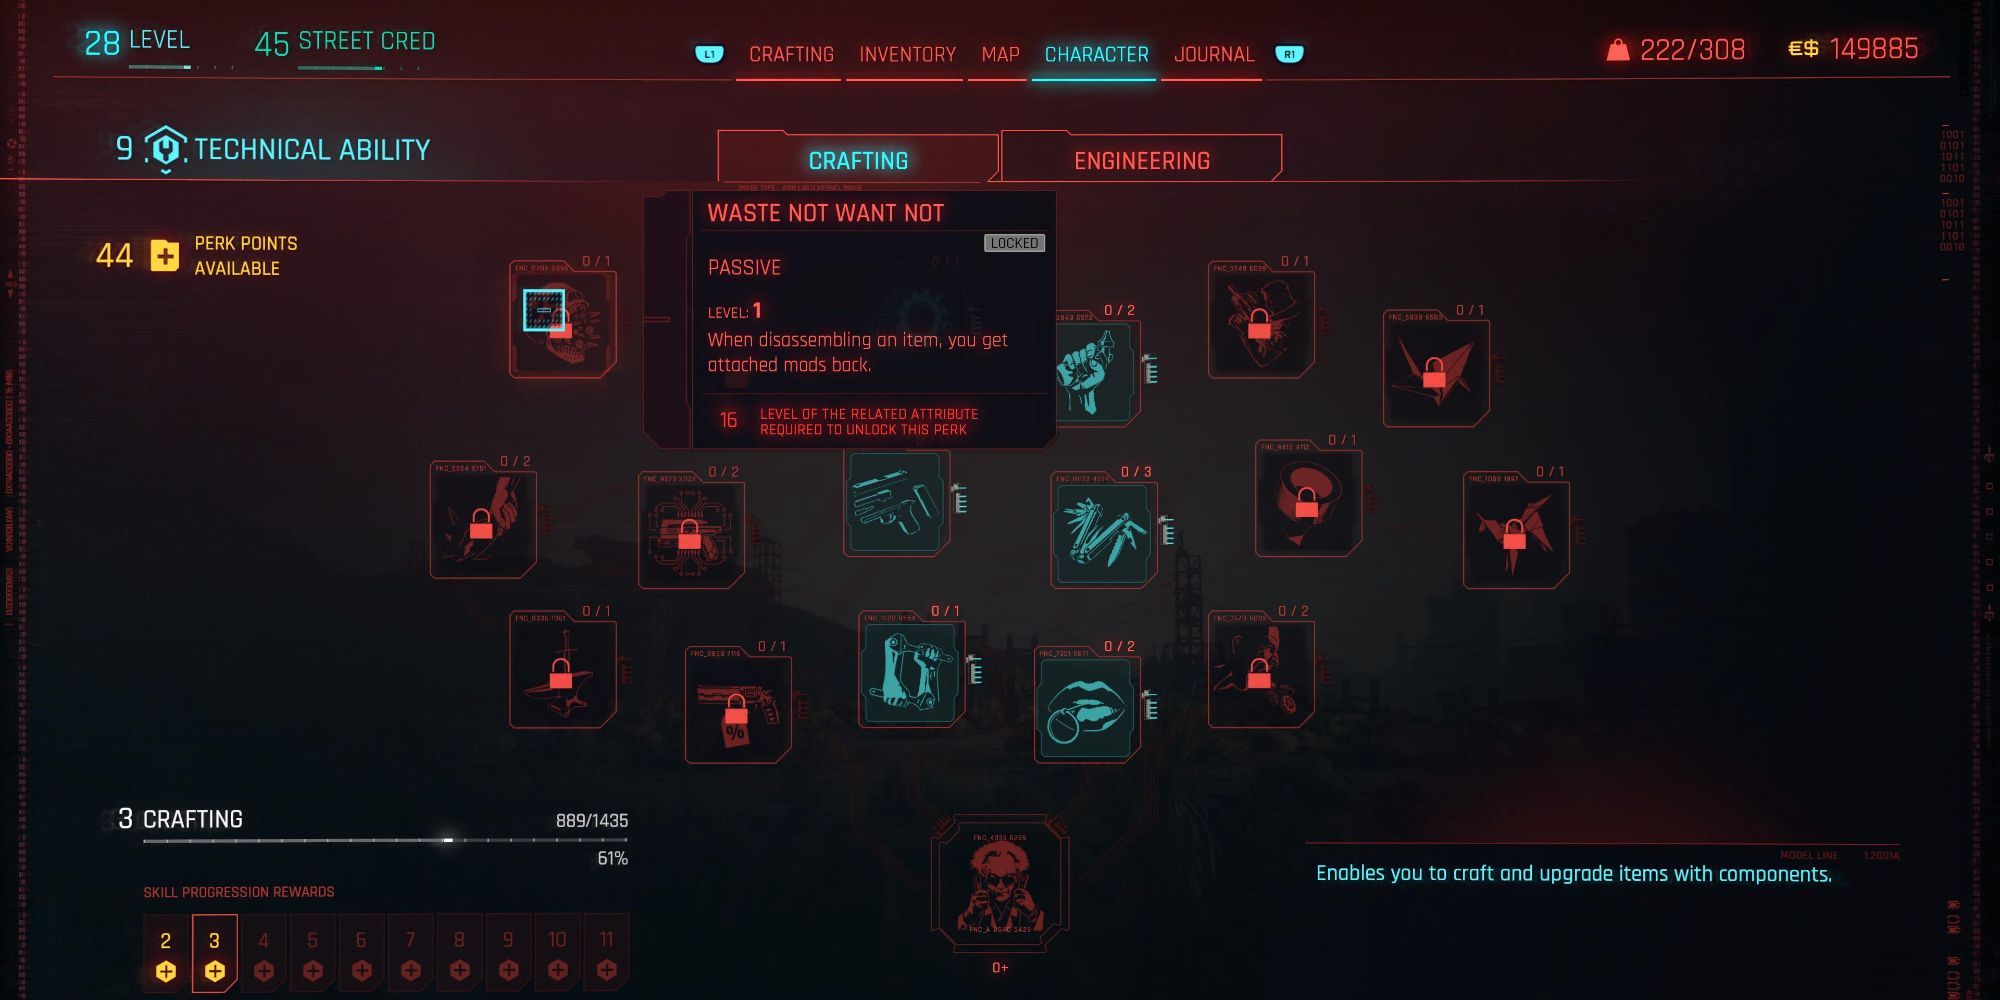 Cyberpunk 2077 Crafting Waste Not Want Not Skill Tree